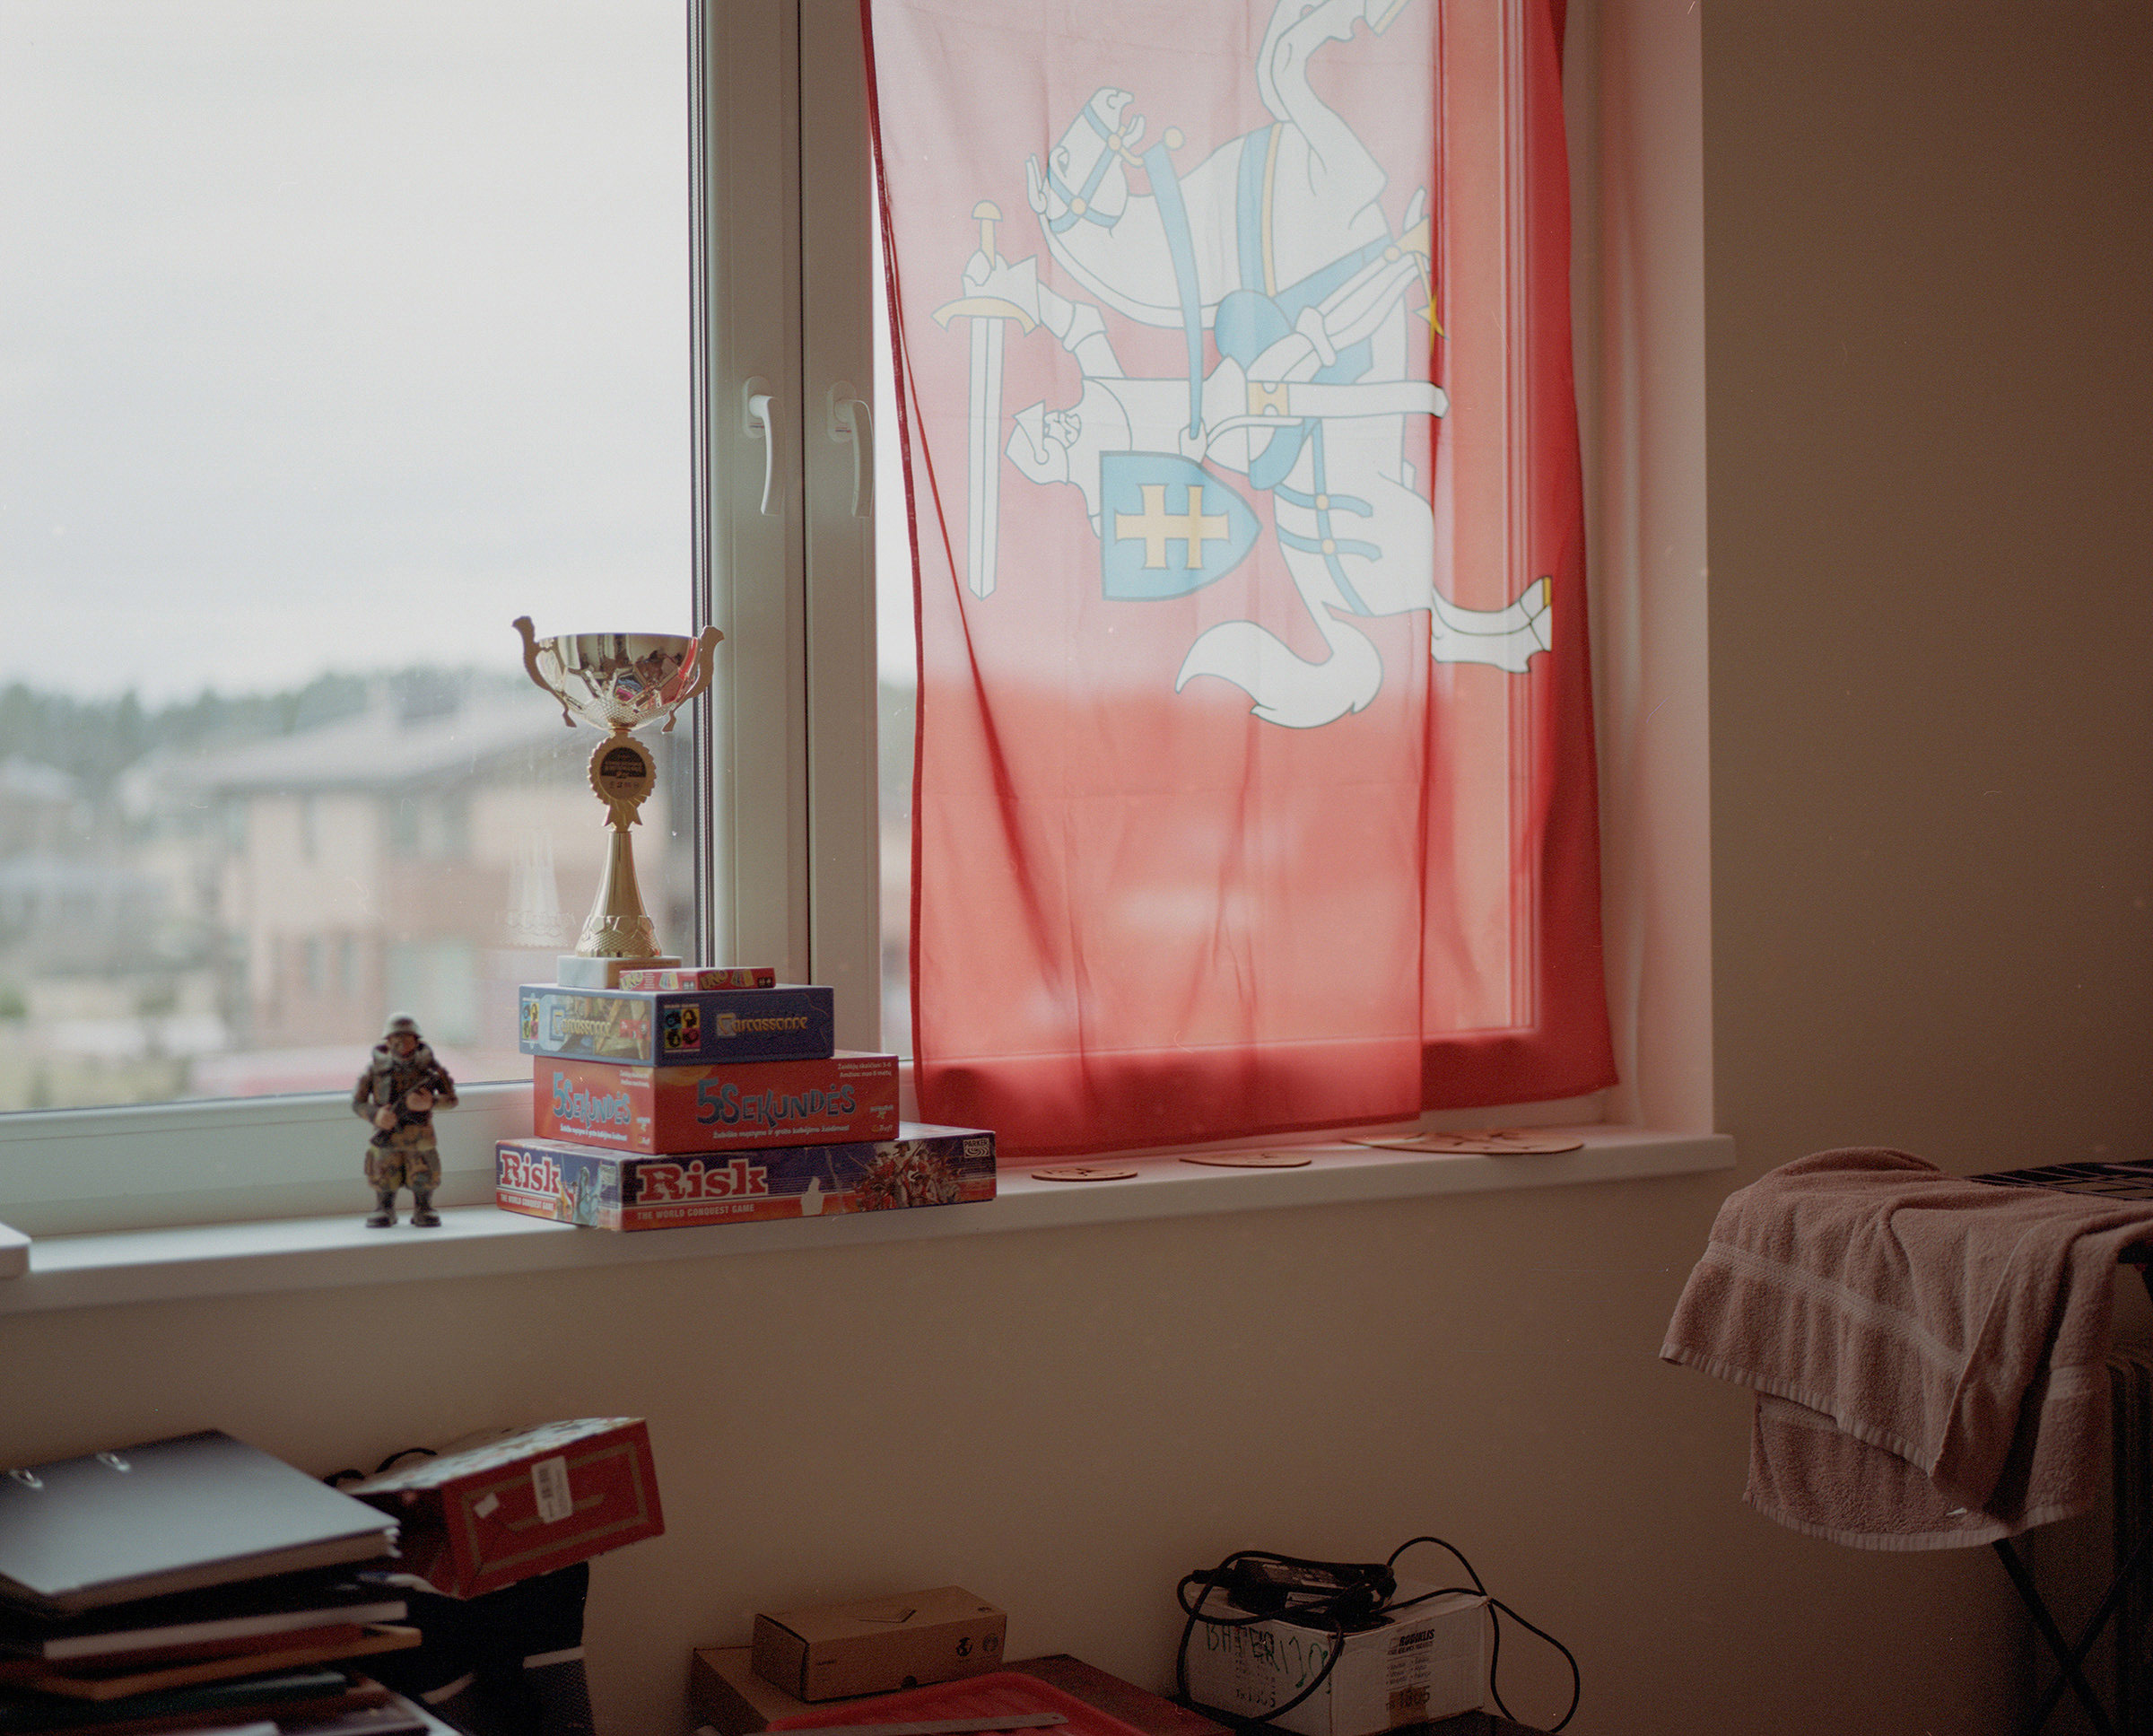 A historic Lithuanian National flag standing next to a toy soldier, games and a trophy, in Kaunas, Lithuania, on March 4. (Tadas Kazakevicius for TIME)